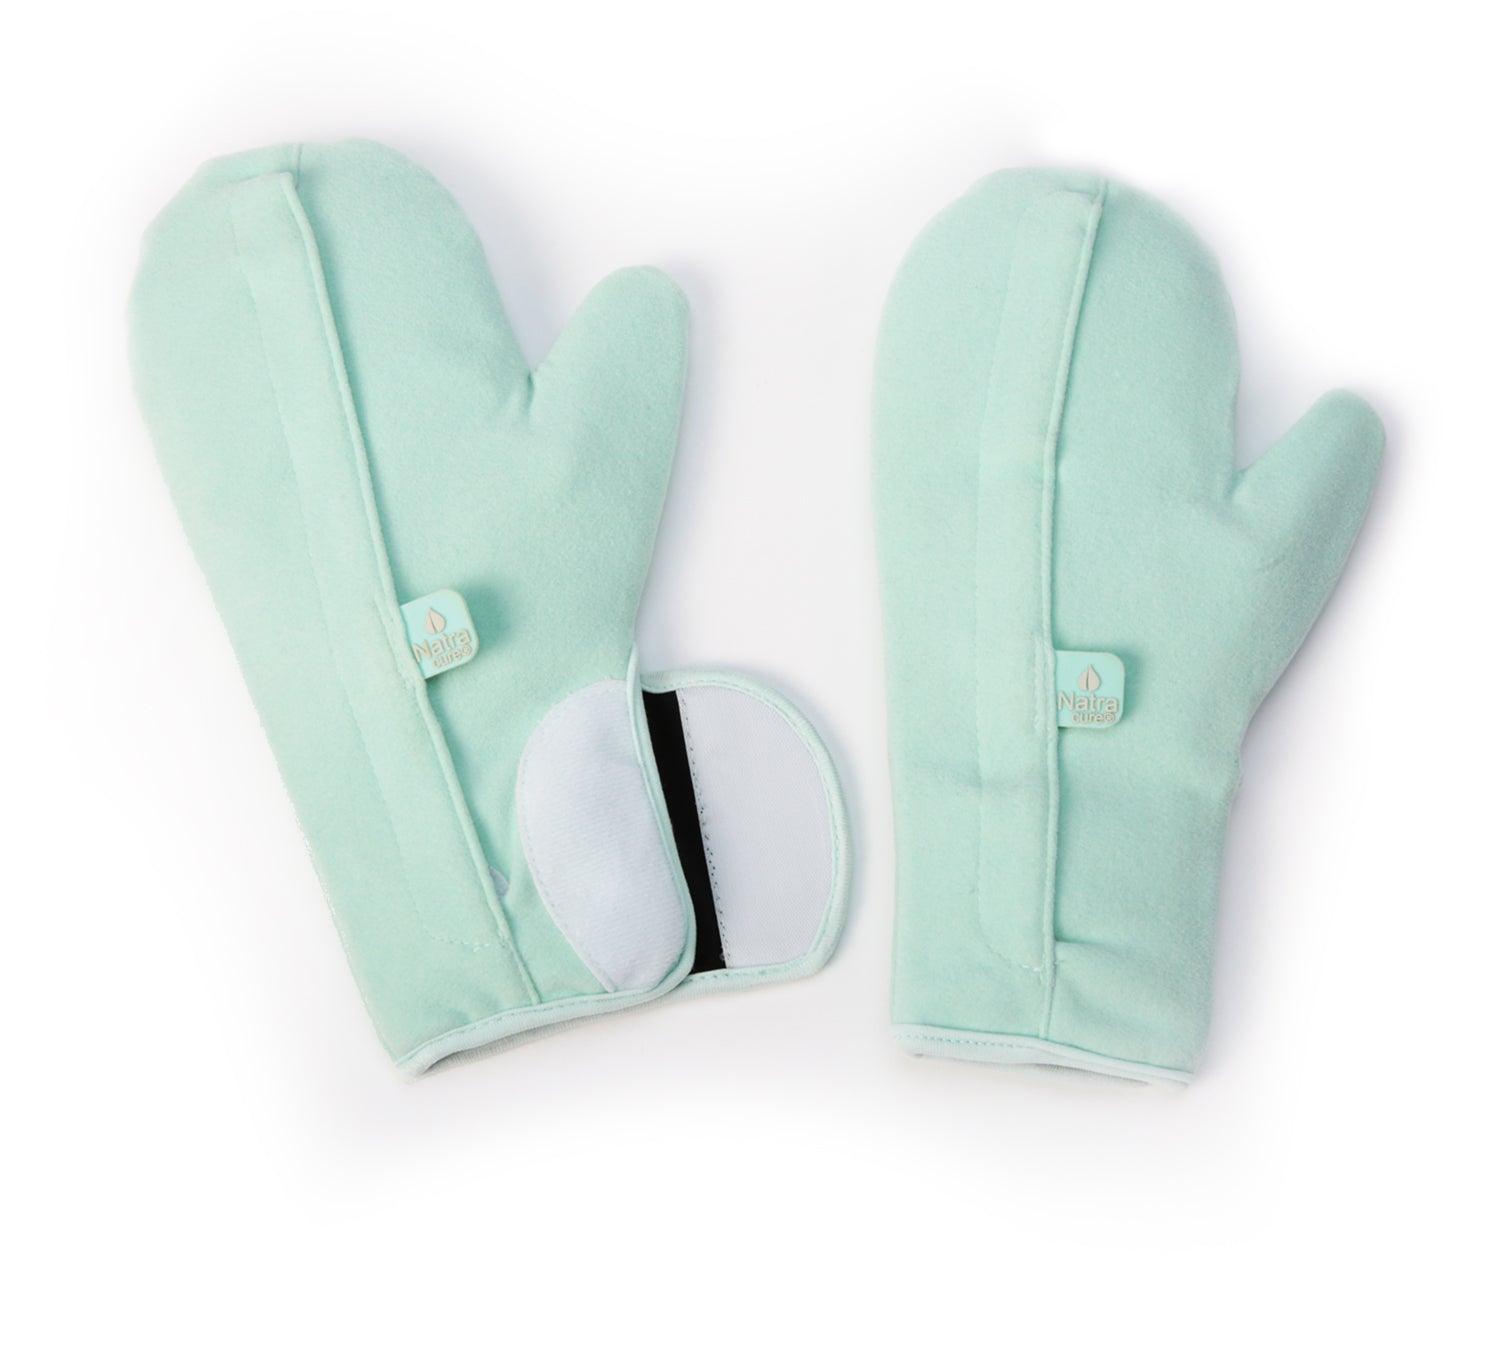 Pair of Cold Therapy Mitts